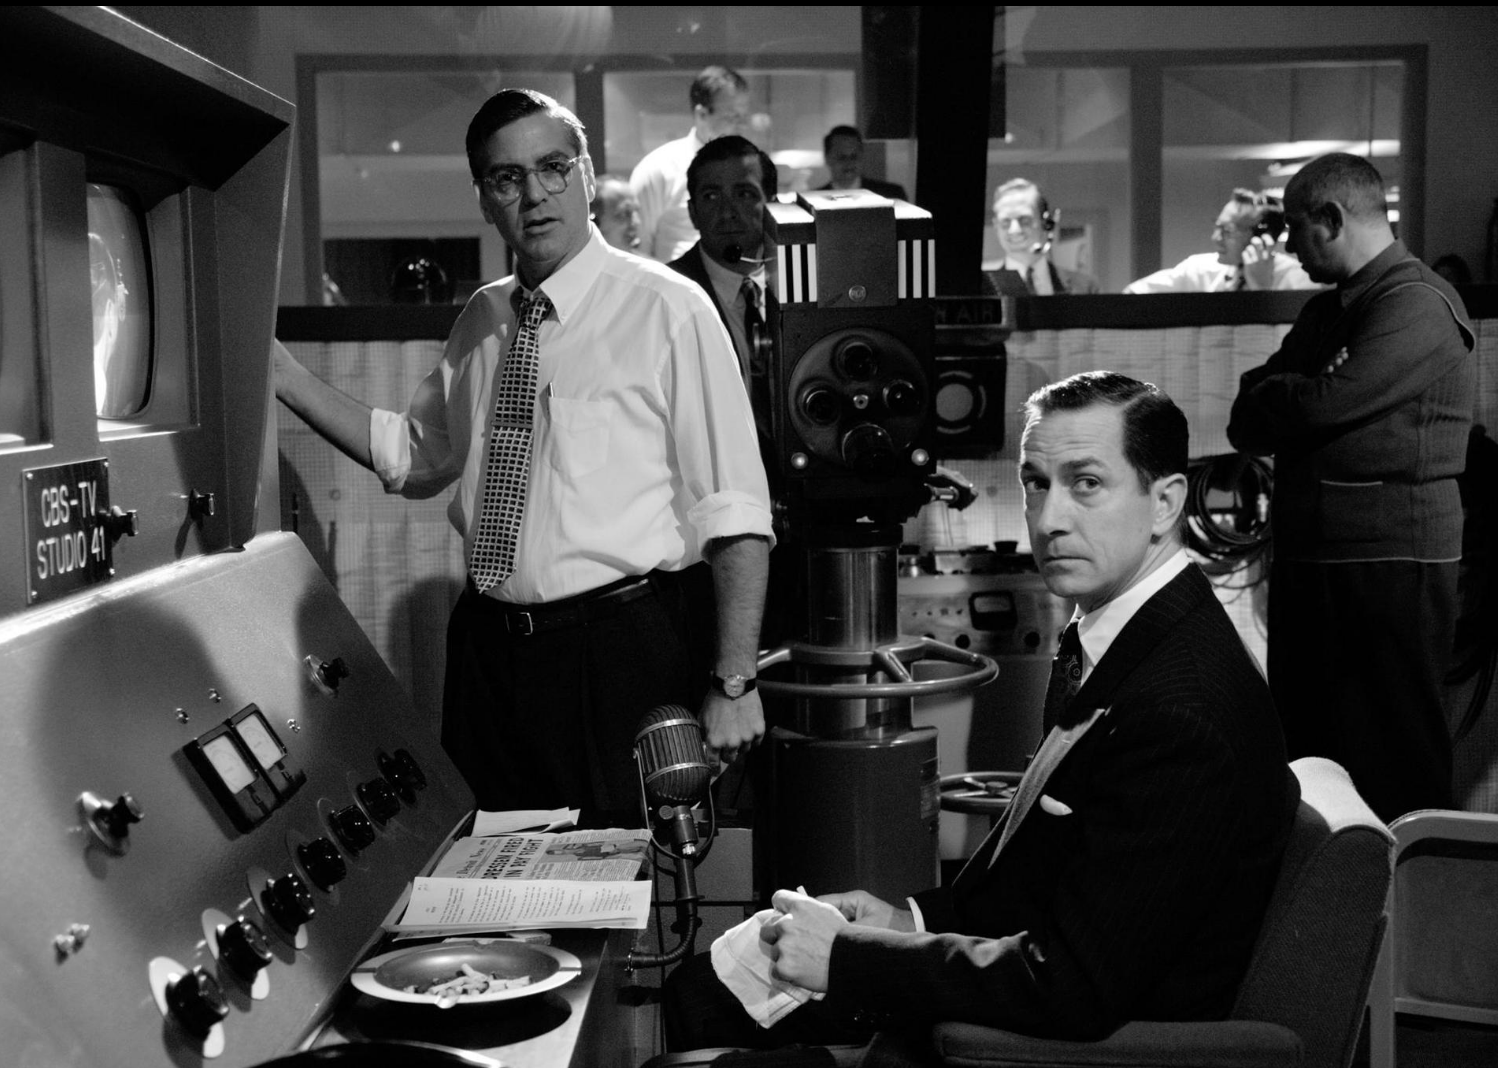 George Clooney and David Strathairn in "Good Night, and Good Luck"